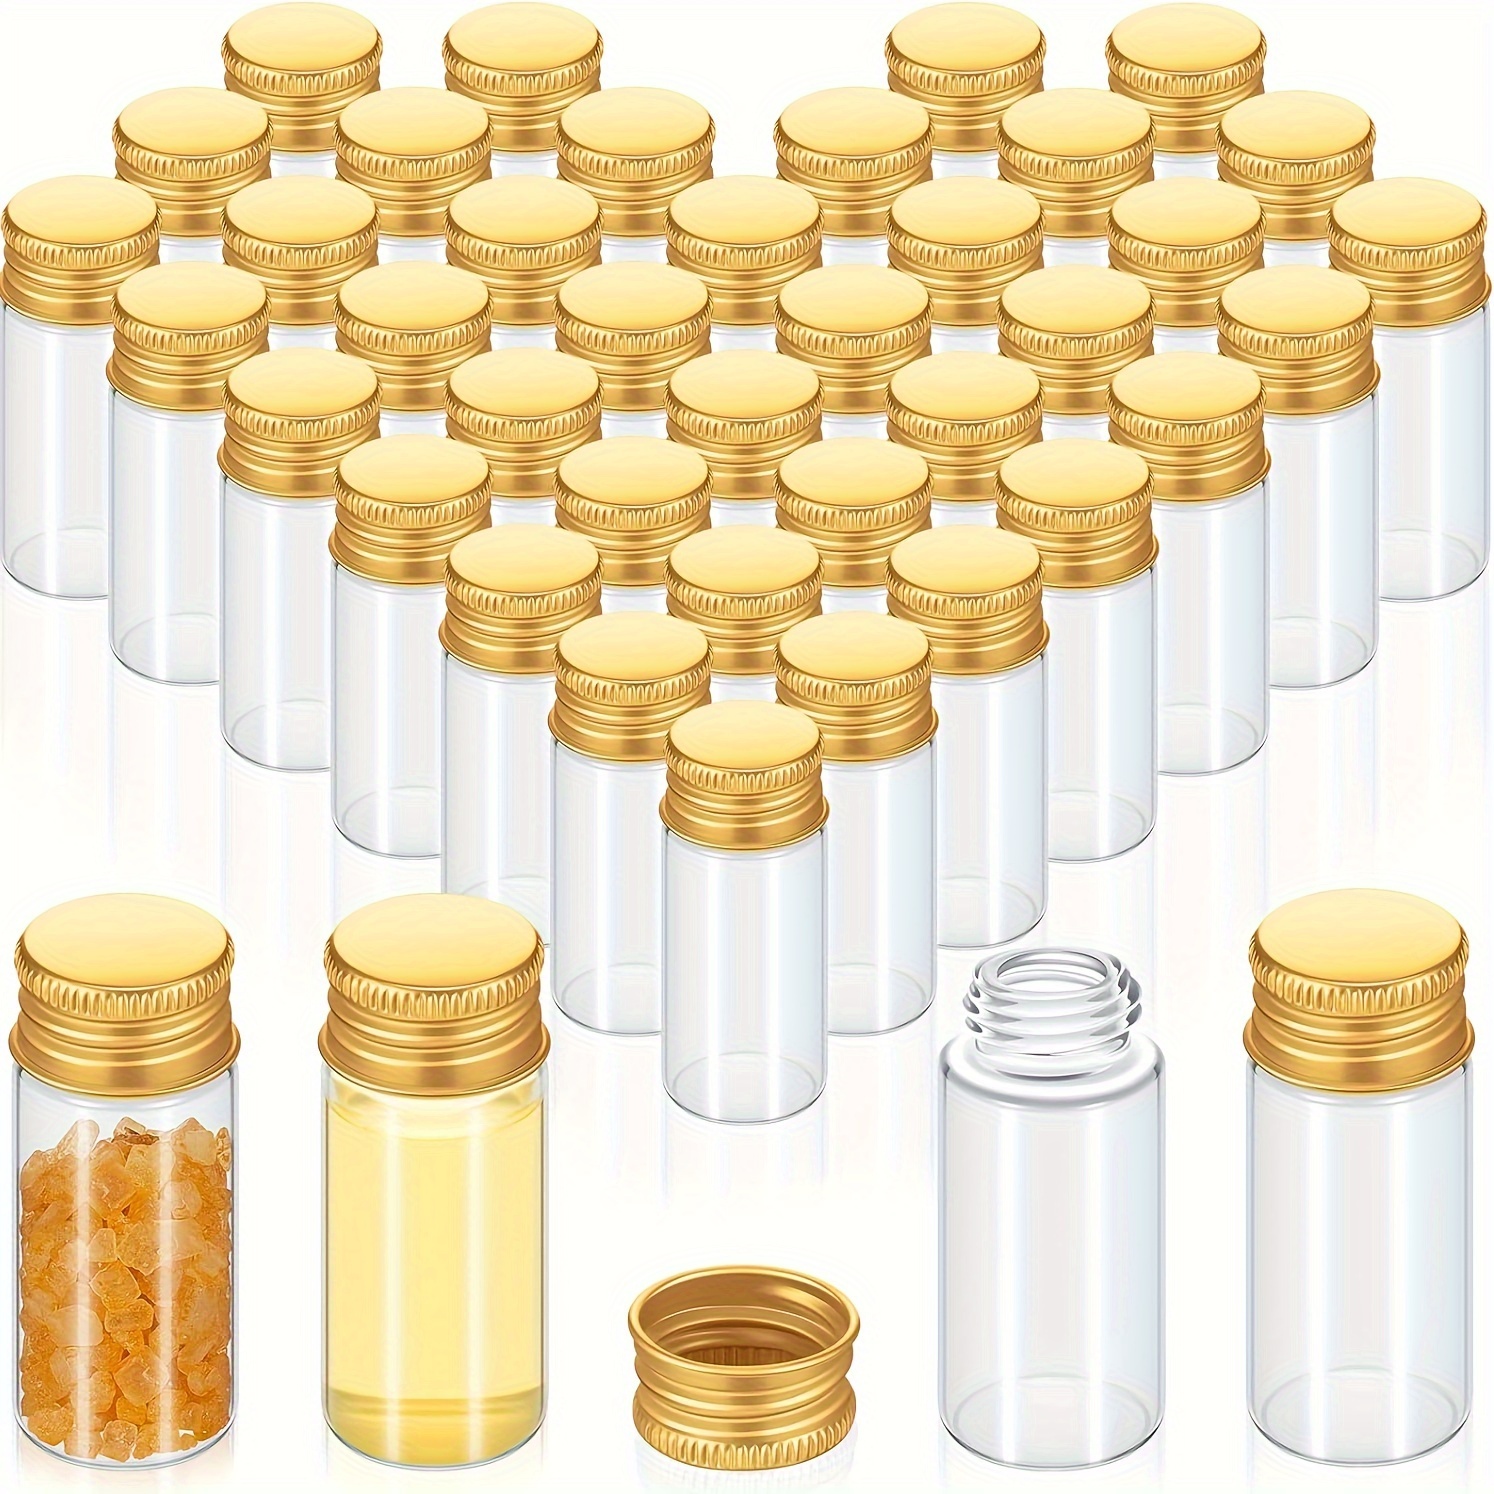 

20pcs, Mini Transparent Bottles With Aluminum Golden Caps, Small Empty Vials (10/15/25ml), Screw Lid Leak-proof, Diy Powder Cream Sample Containers For Storage And Crafts, Travel Accessories